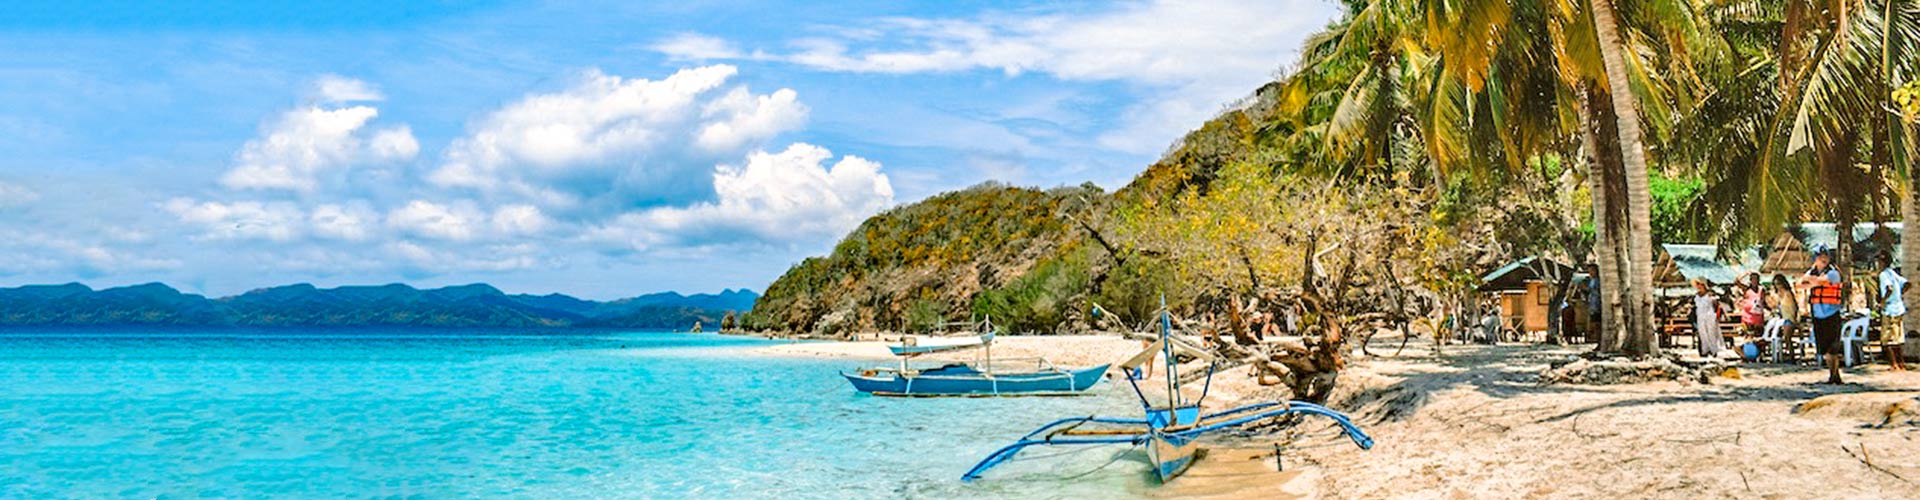 5 Days Relaxing Coron Tour with Ultimate & Island Escapade Experience